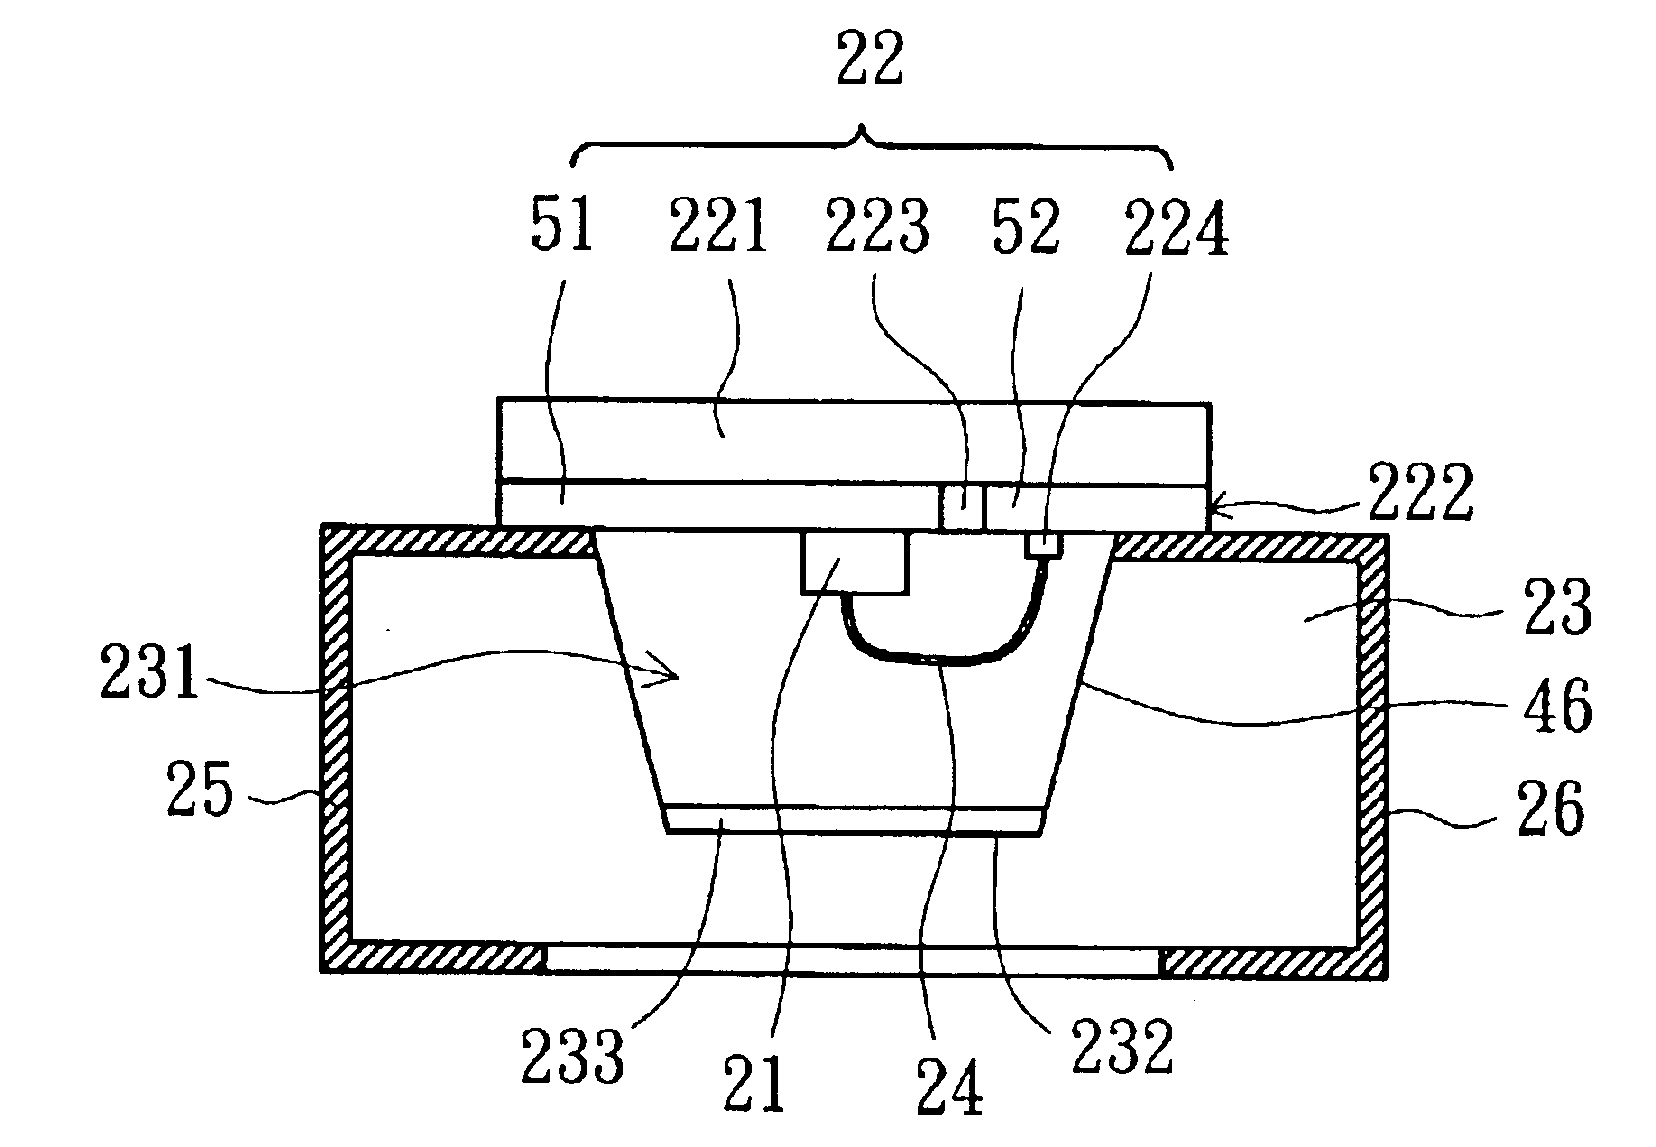 Optoelectronic device with reflective surface